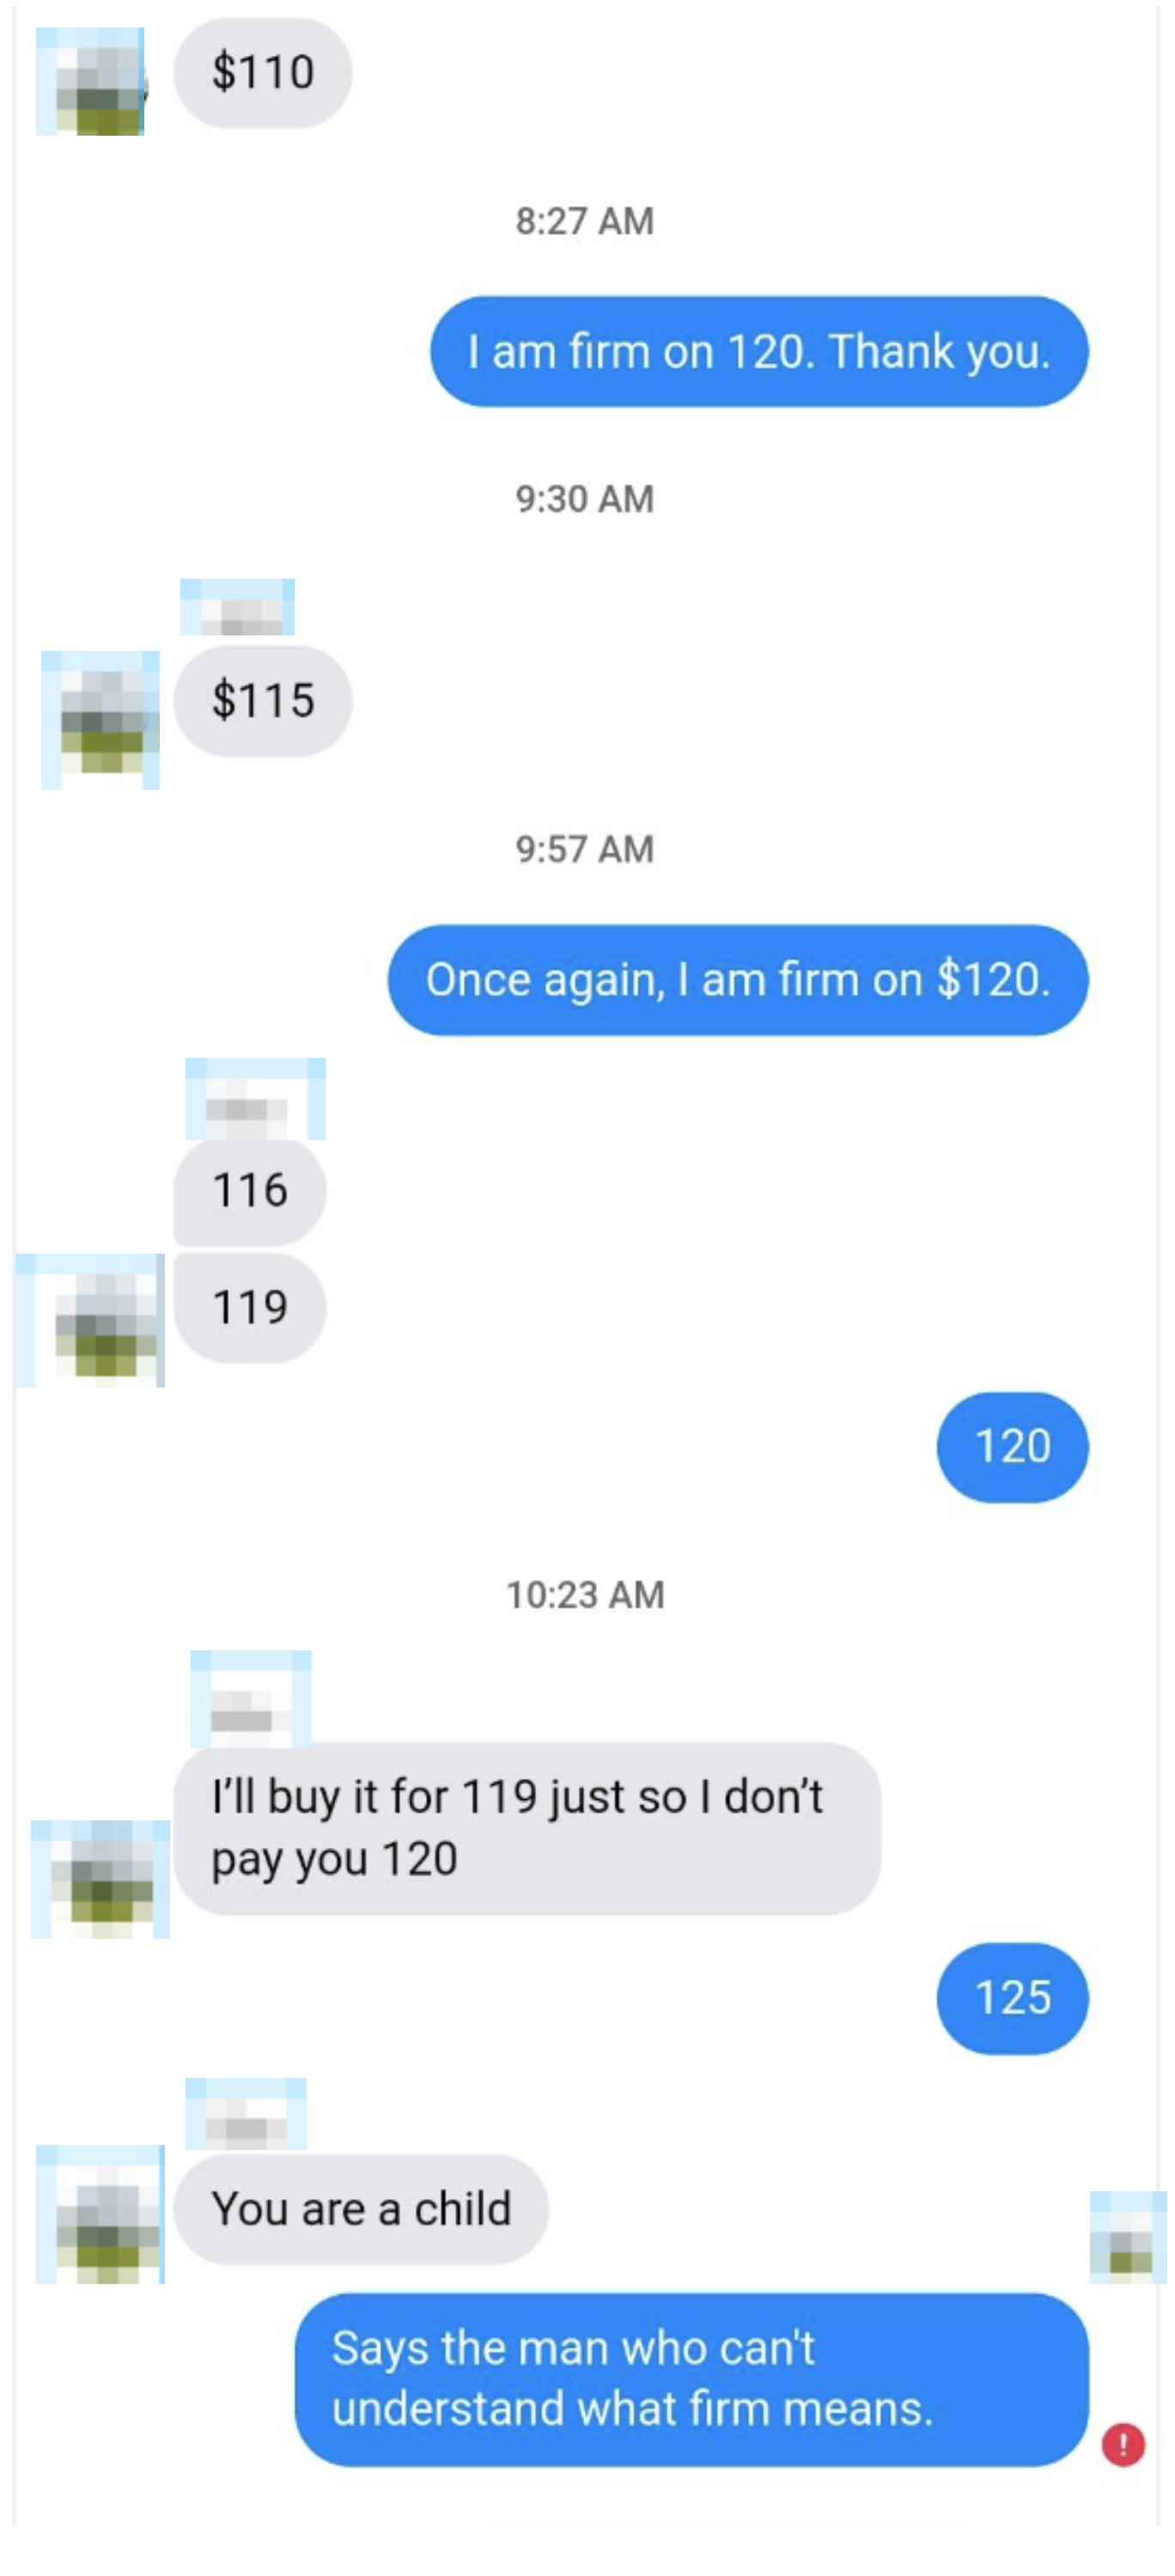 Text message exchange showing a price negotiation with one person firm on $120 and the other offering various amounts, ending in a humorous quip